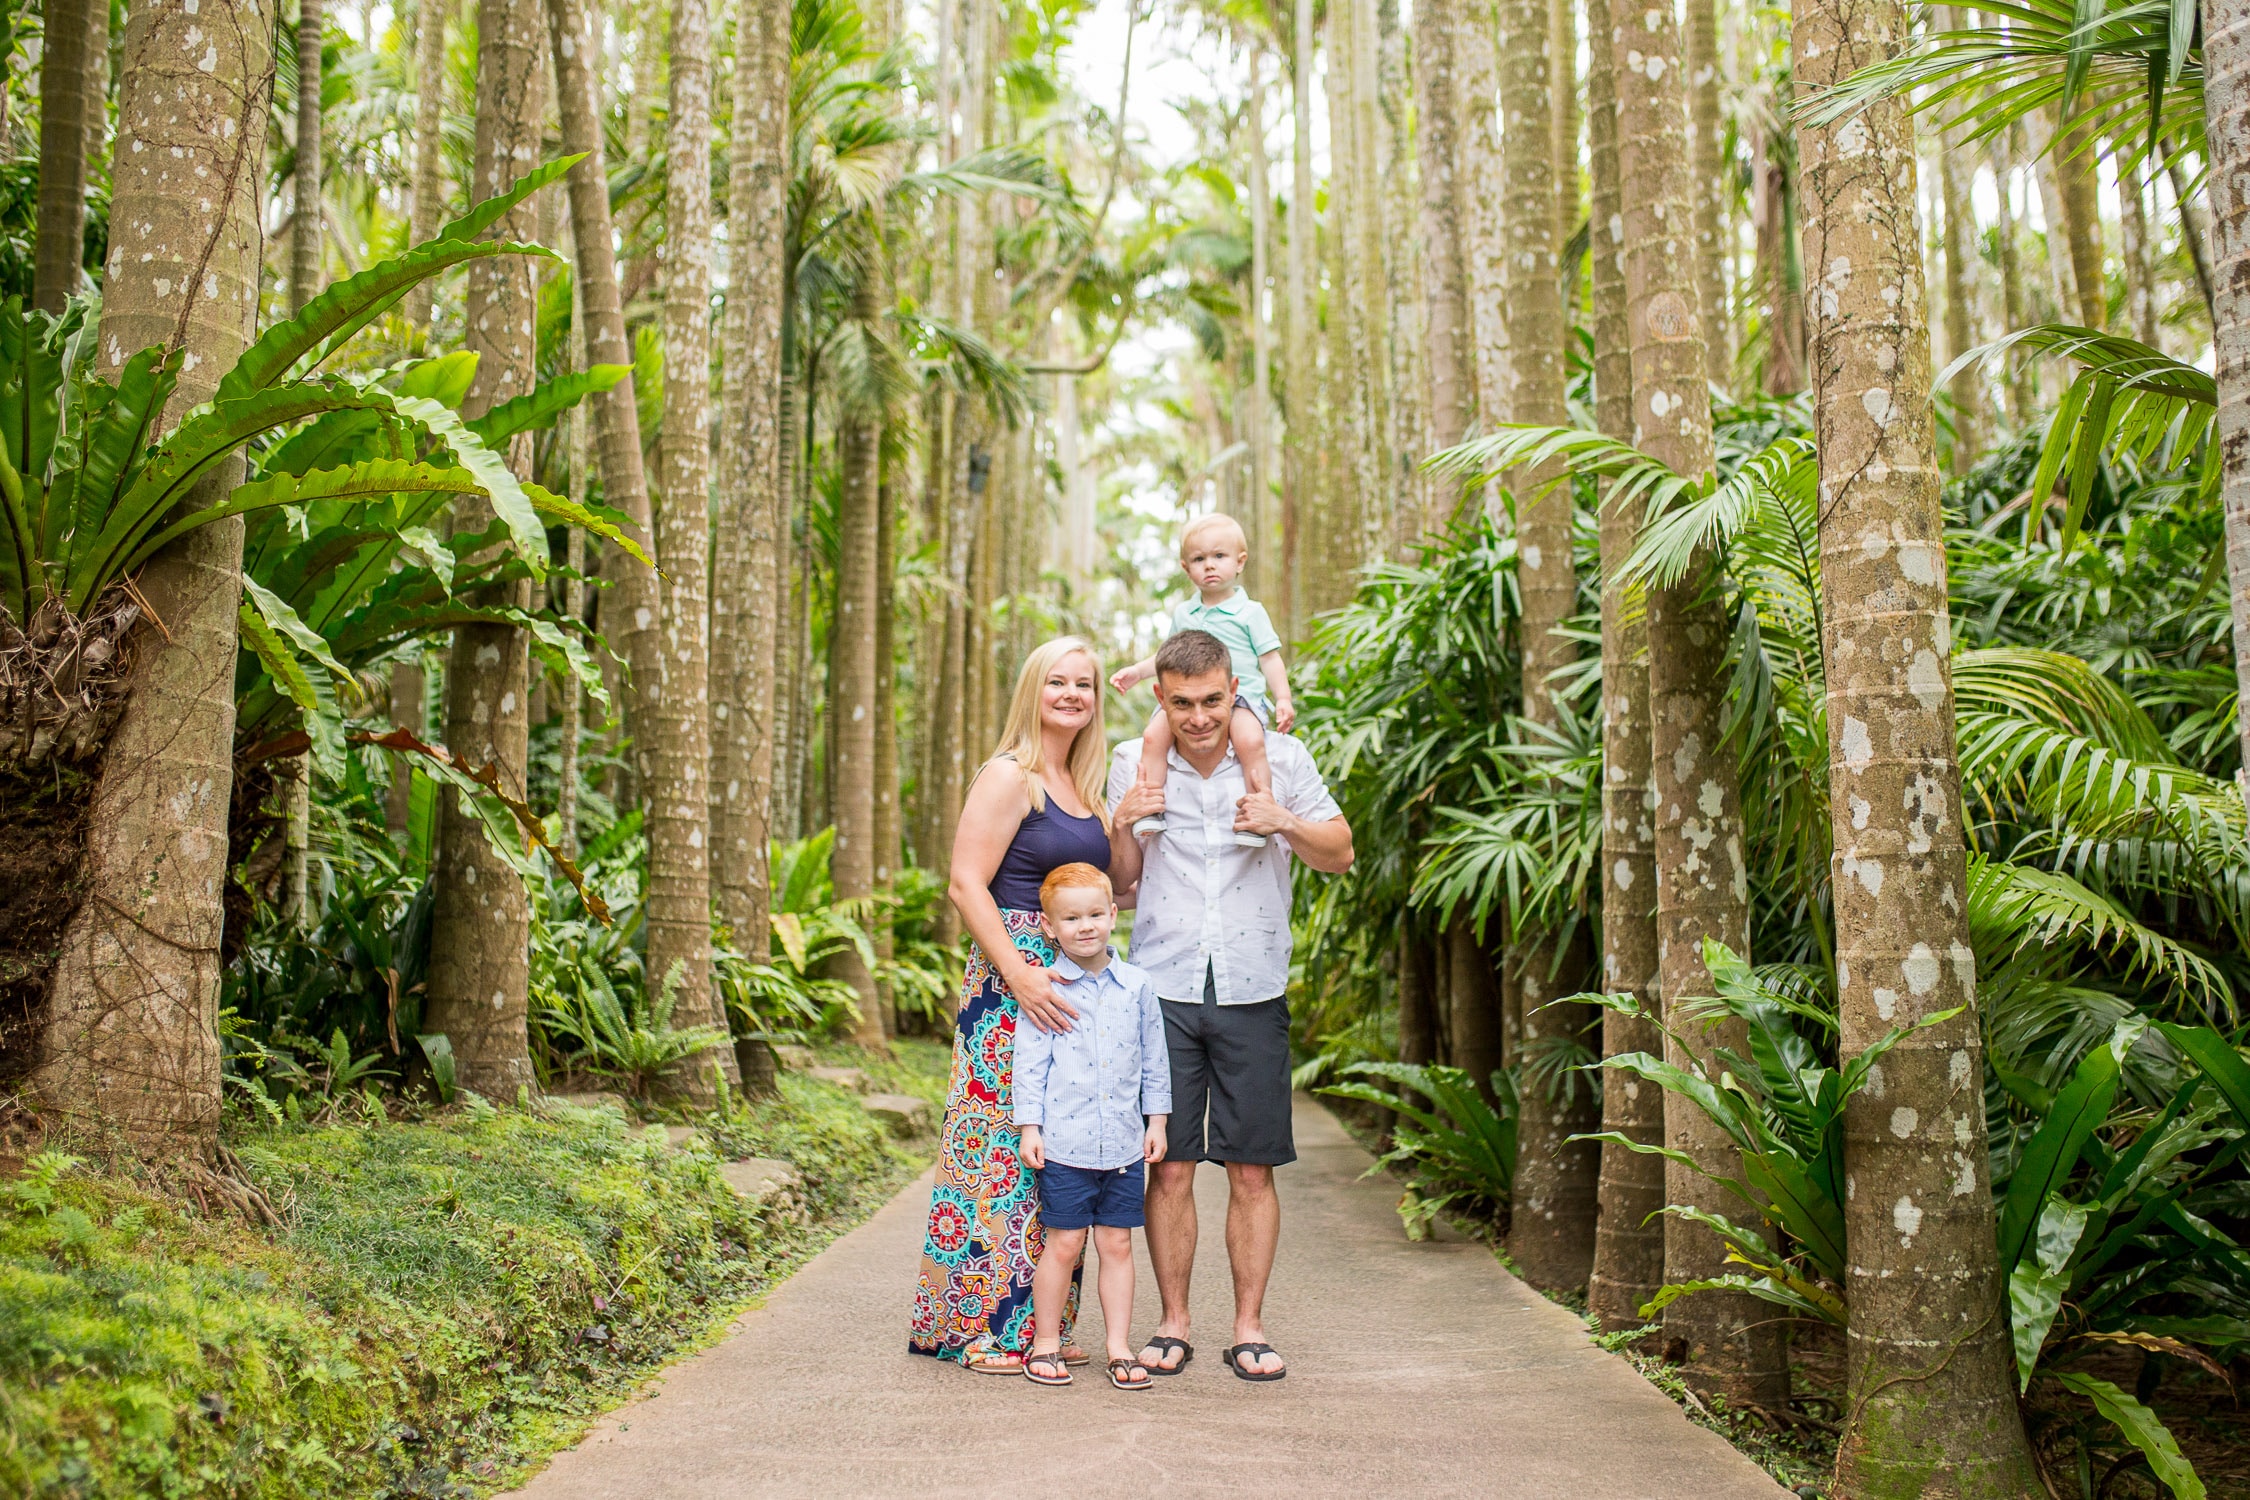 Family of four photo session at Okinawa's Southeast Botanical Gardens by Alison Bell, Photographer